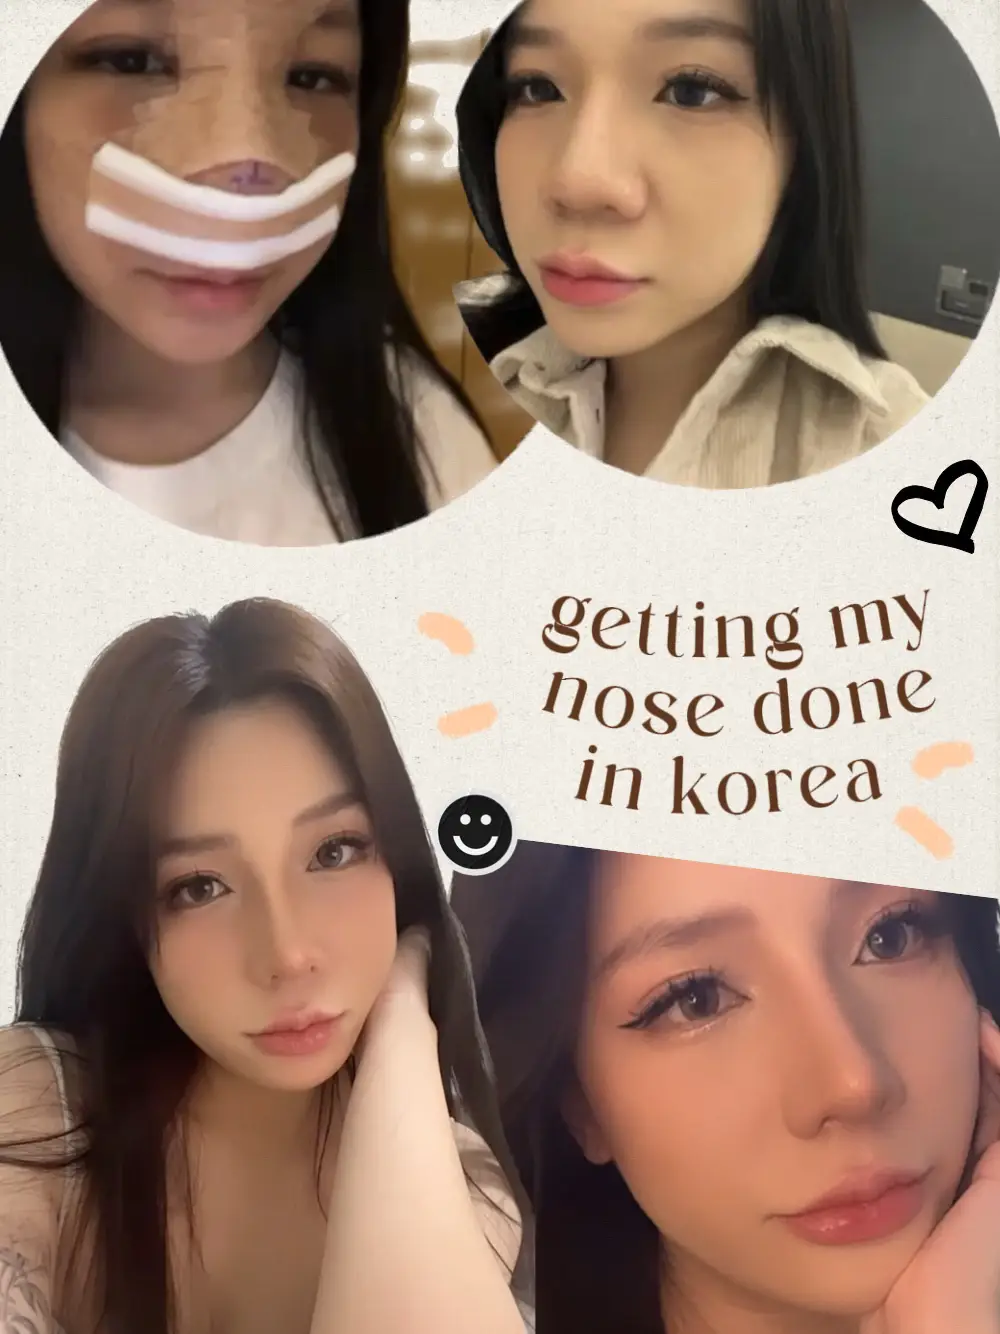 Got a nose job in Korea 🤕 (Price + Recovery!)'s images(0)